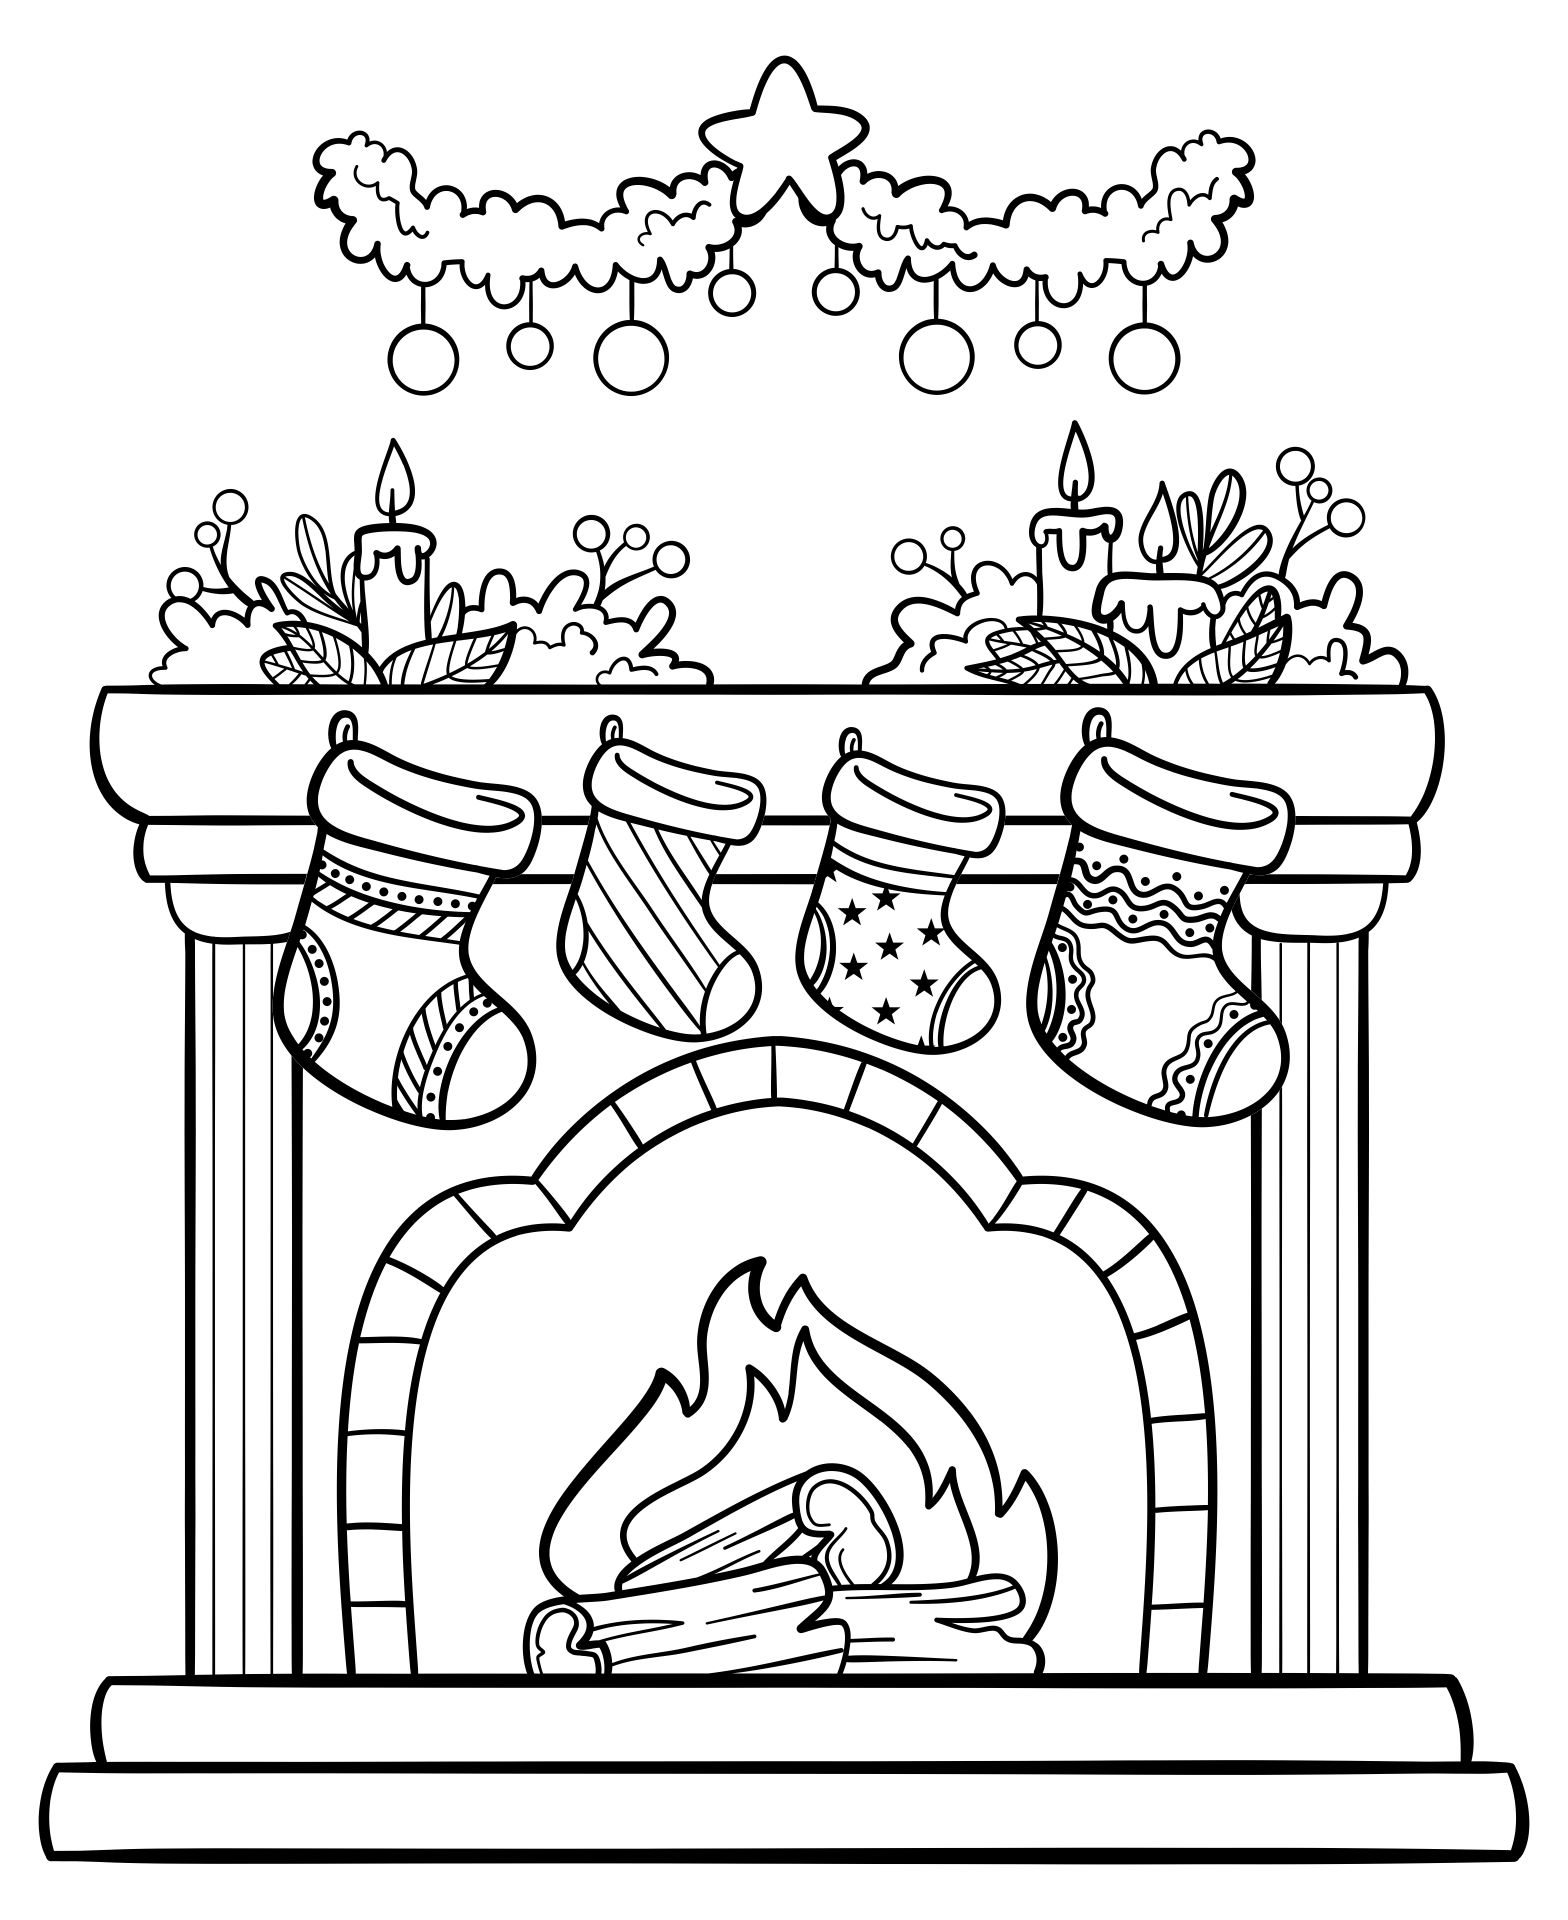 Christmas Coloring Pages For Teachers